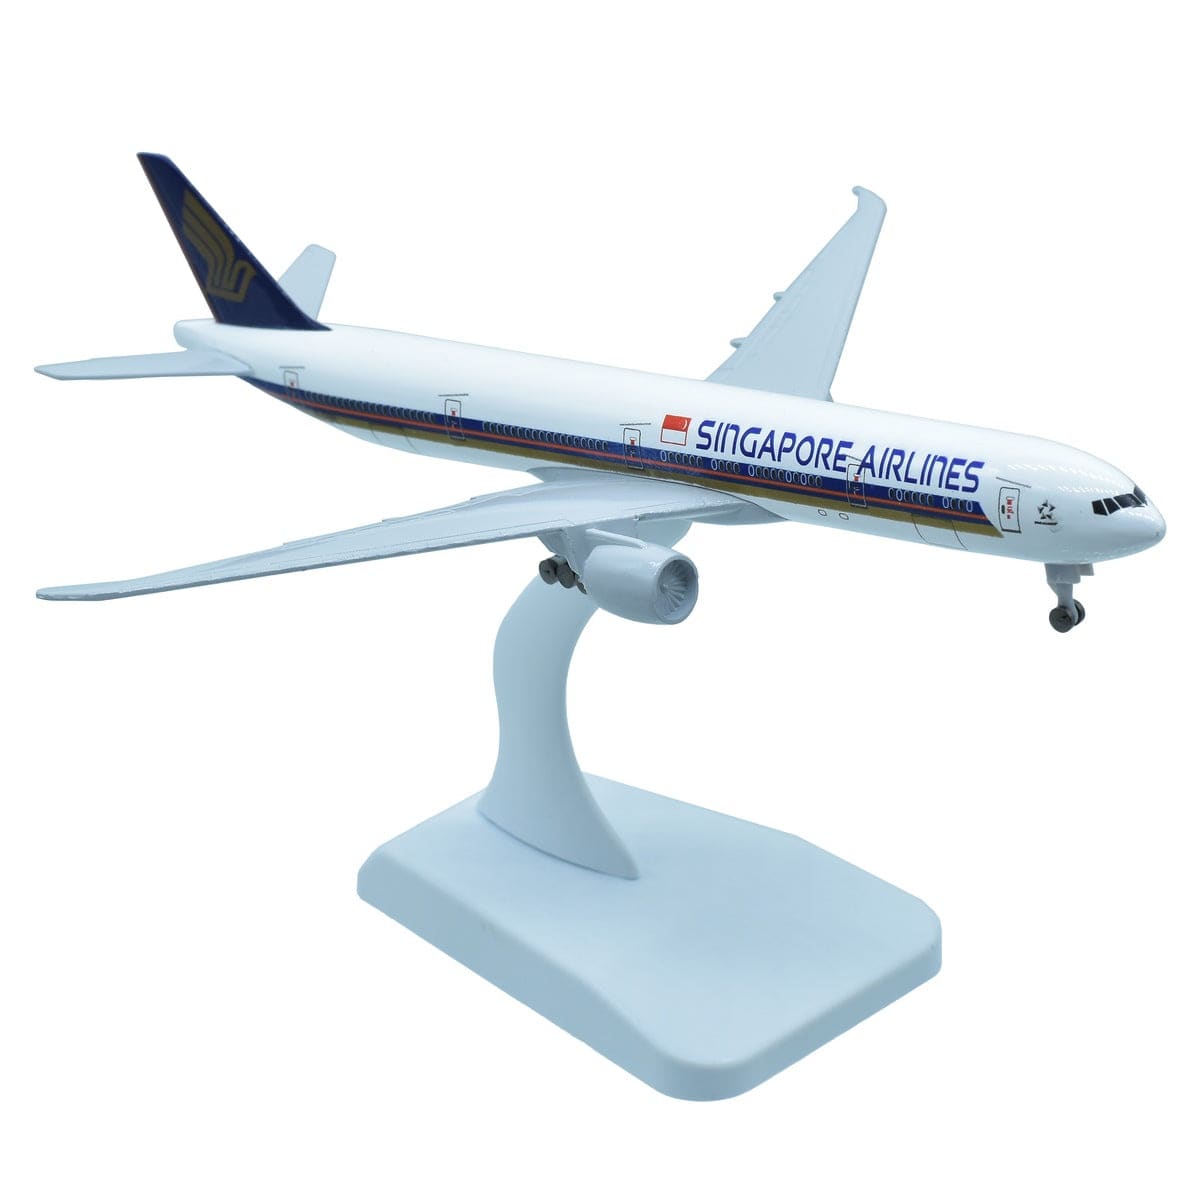 jags-mumbai Office Display Stands Aircraft Model Singapore Airlines ( Big )